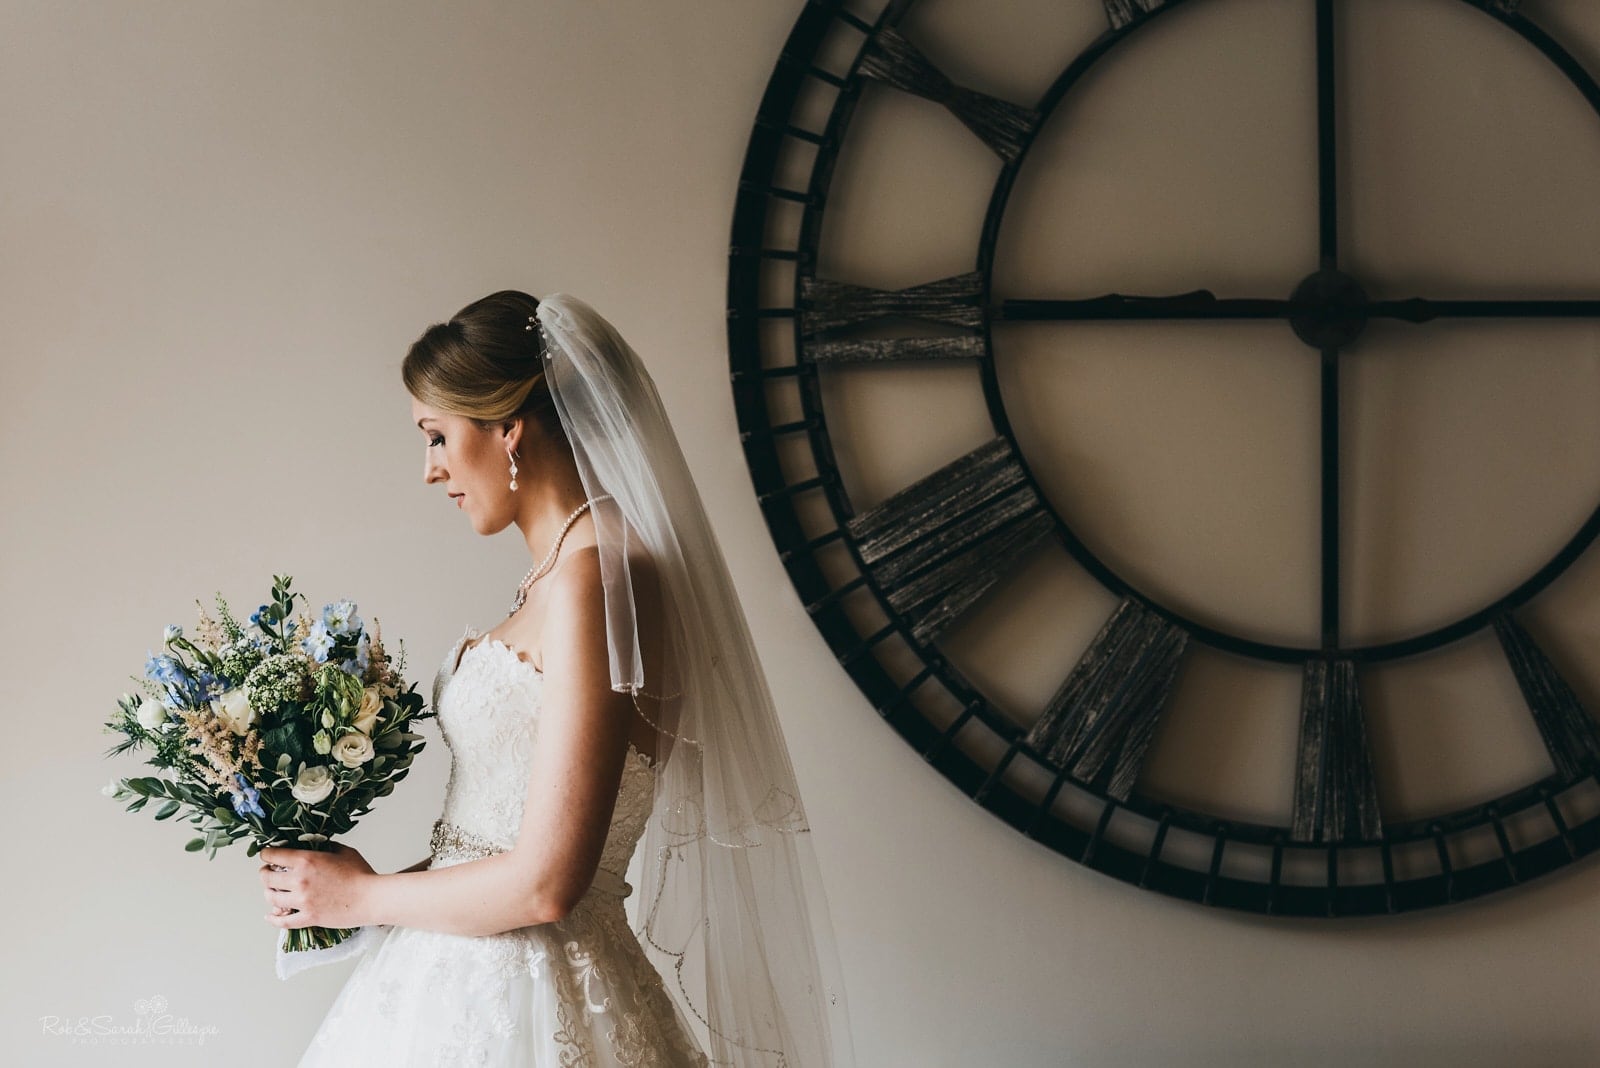 Bride portrait with large clock on wall